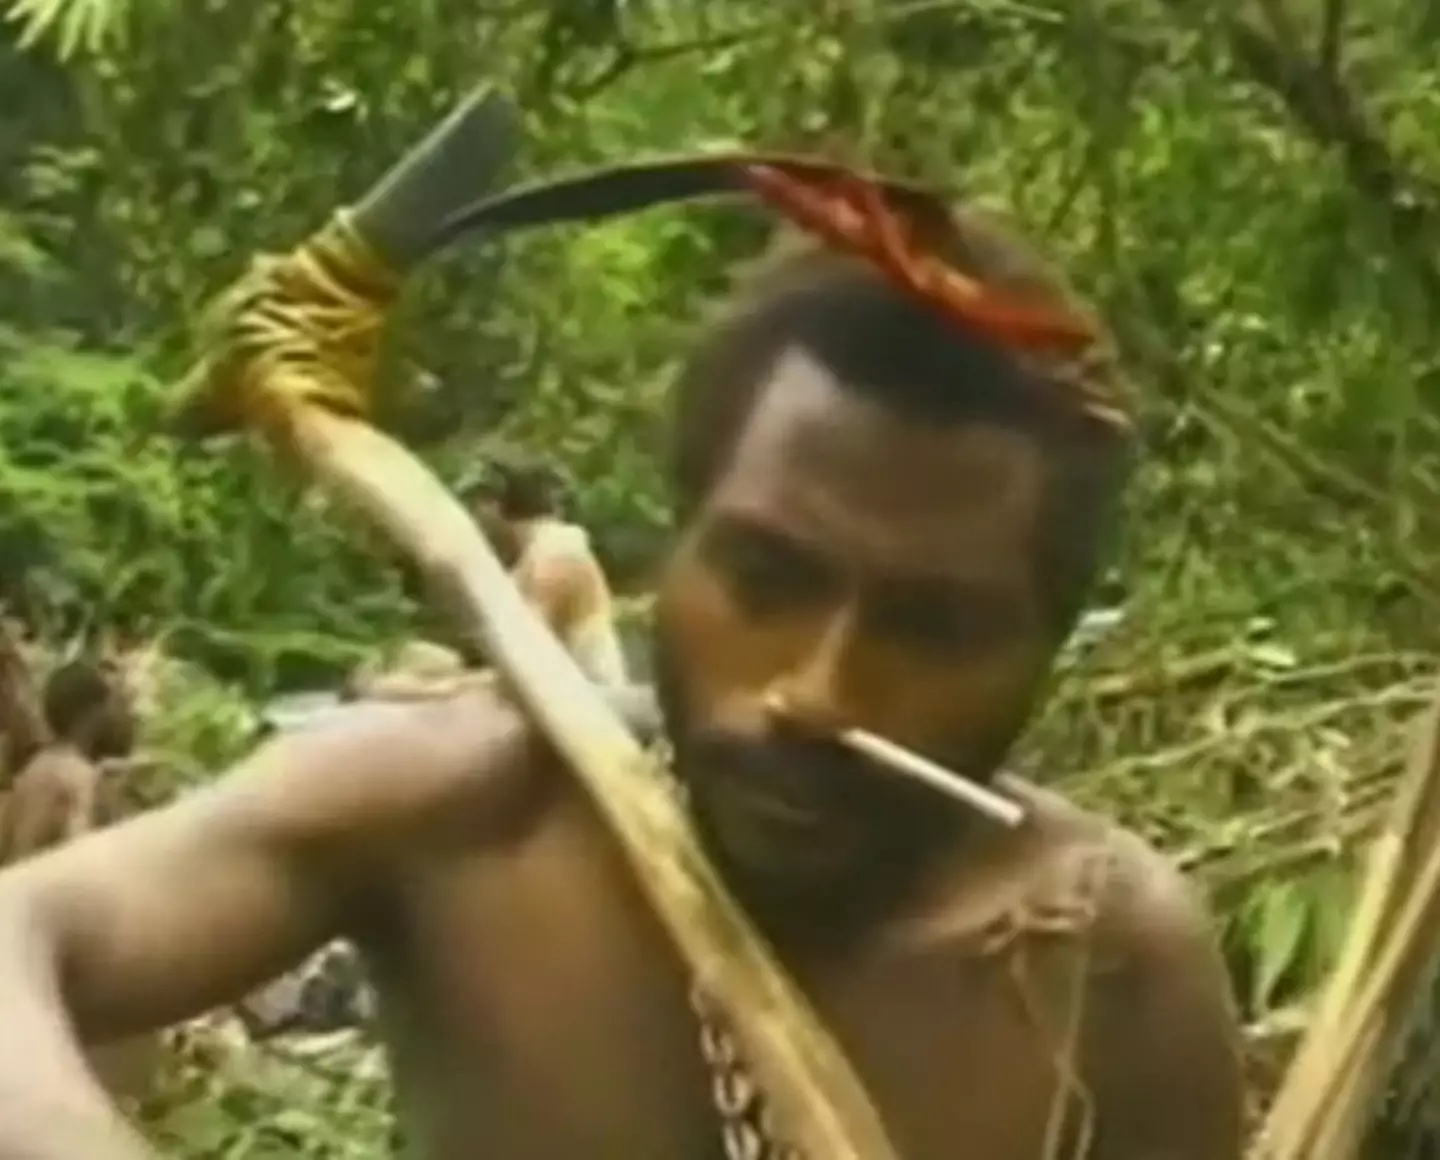 The footage claims to show contact with a tribe in Papua New Guinea. (Youtube / MEDIA TOUR)